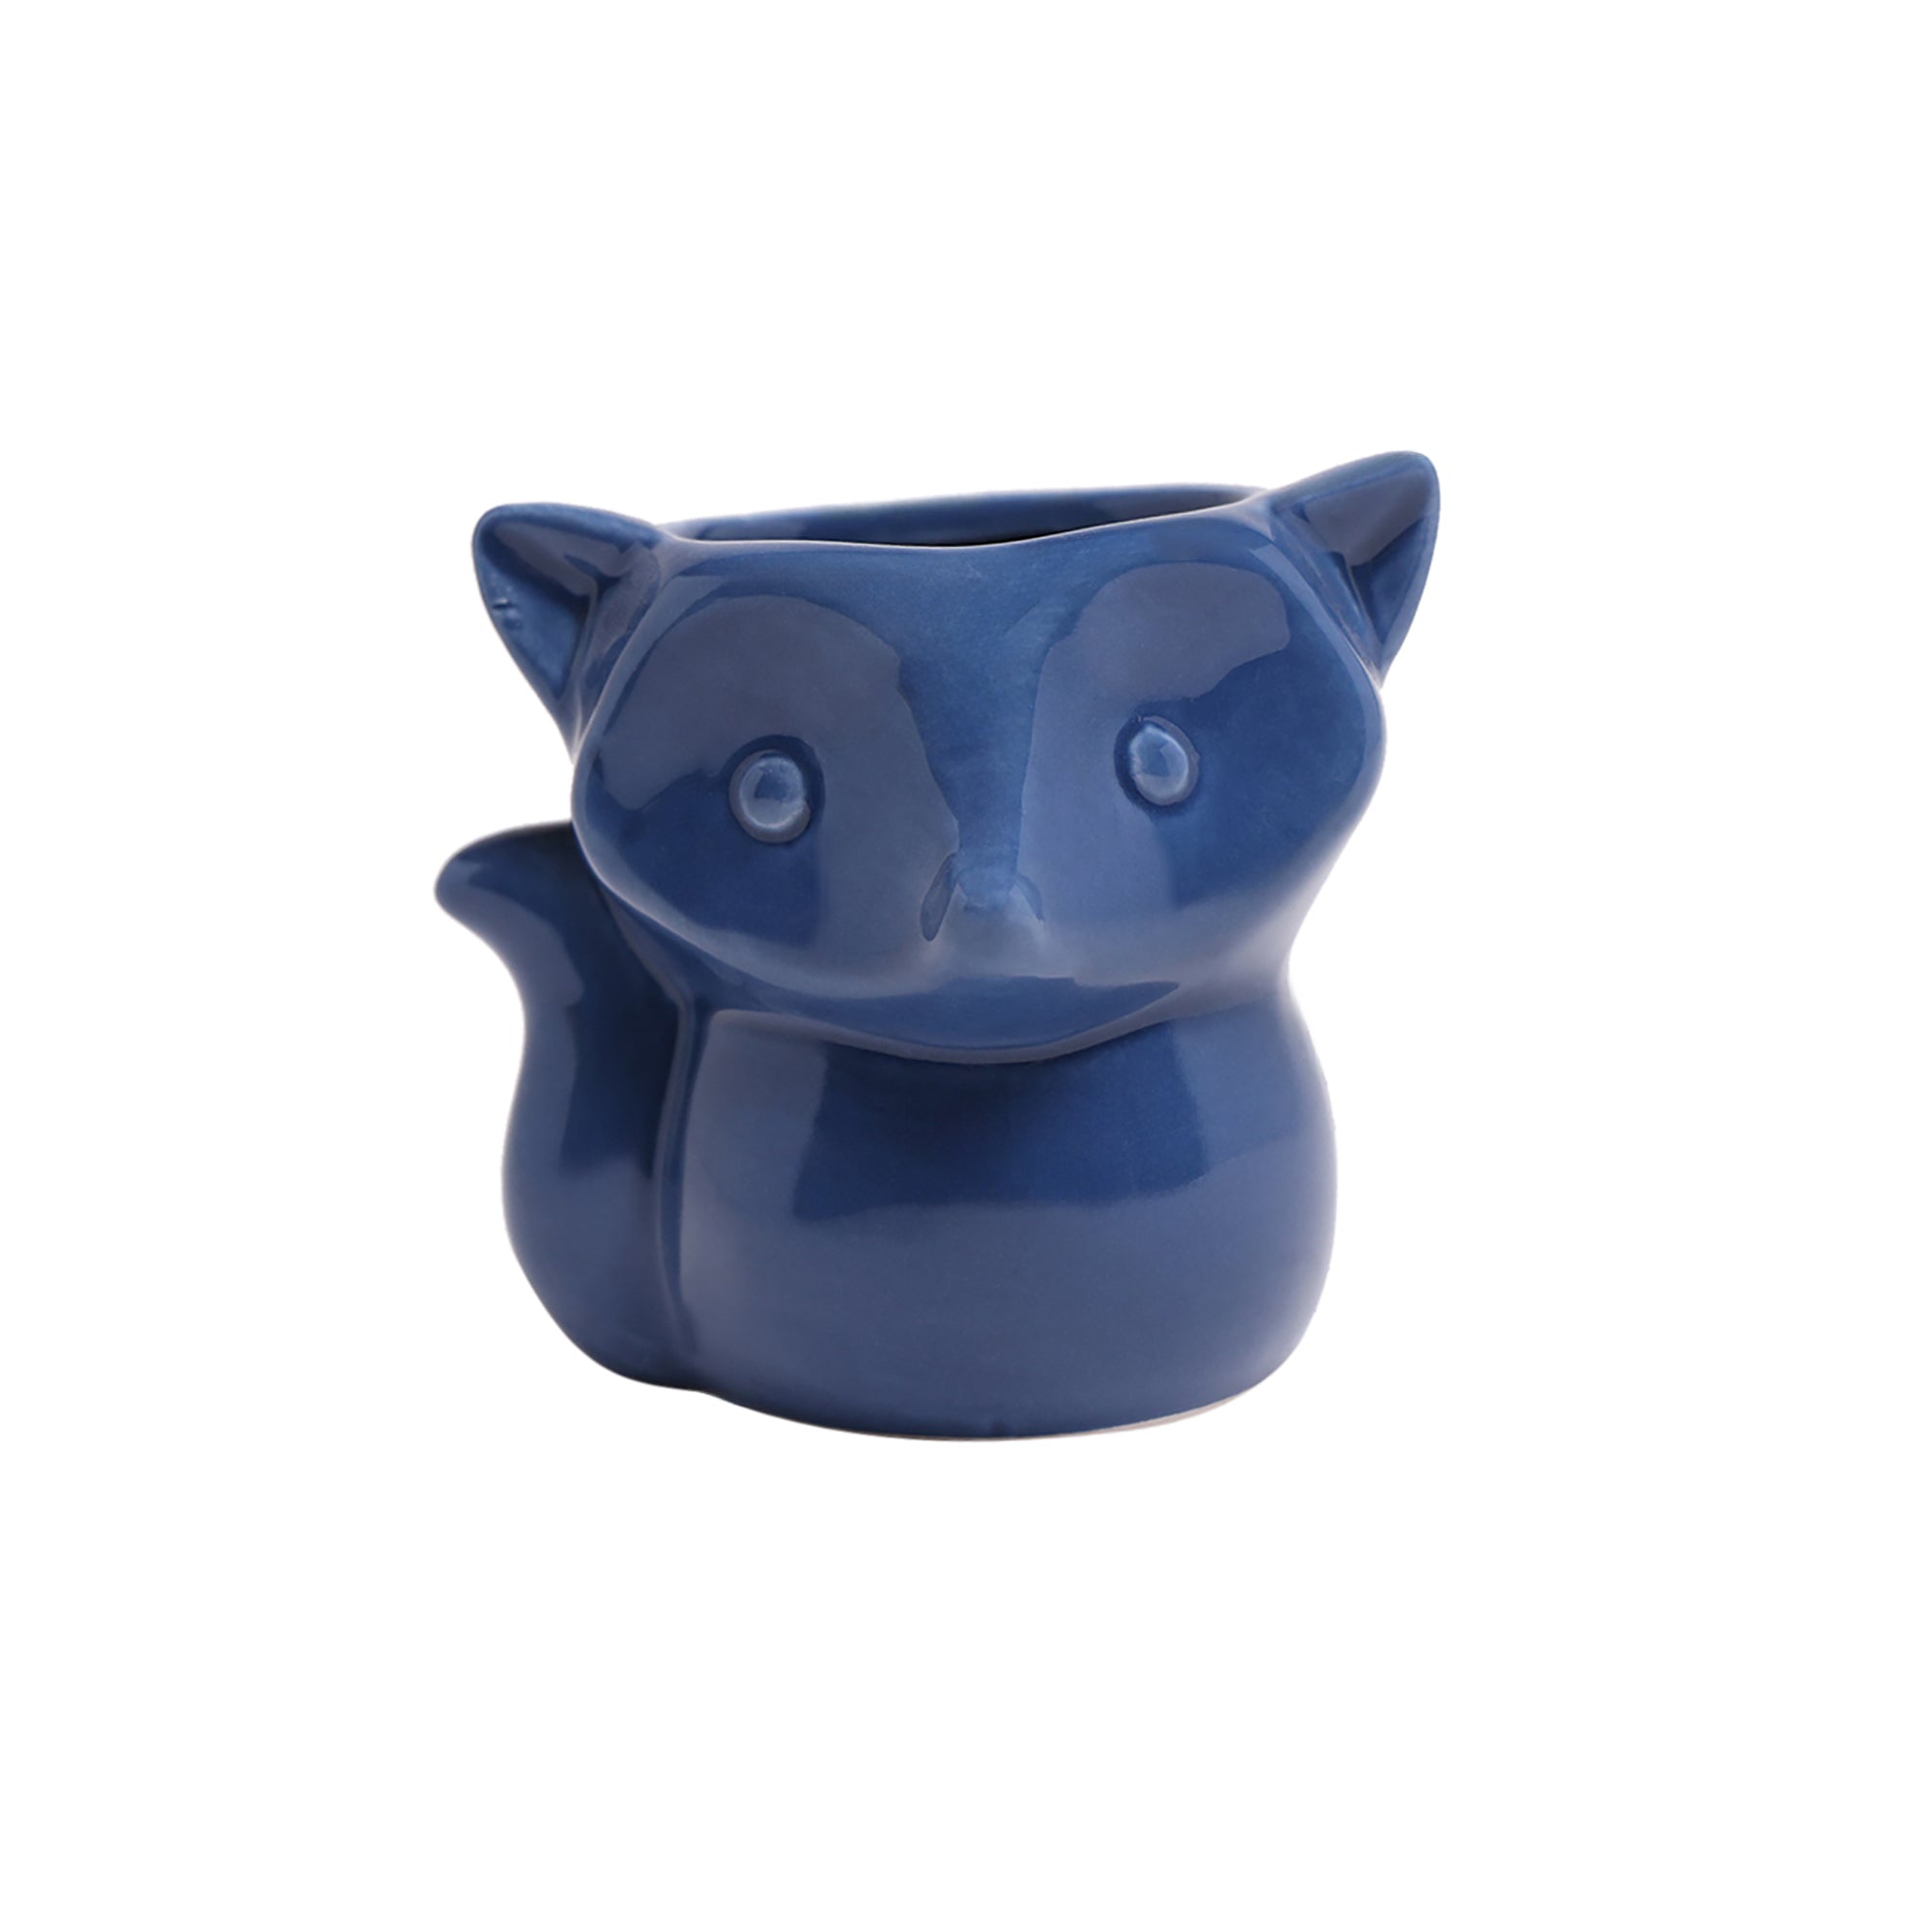 A blue ceramic planter shaped like a cute fox with large eyes and a smooth, glossy finish, isolated on a white background. - Fox Ceramic Indoor Plant Pot For Succulents by Chive Studio 2024